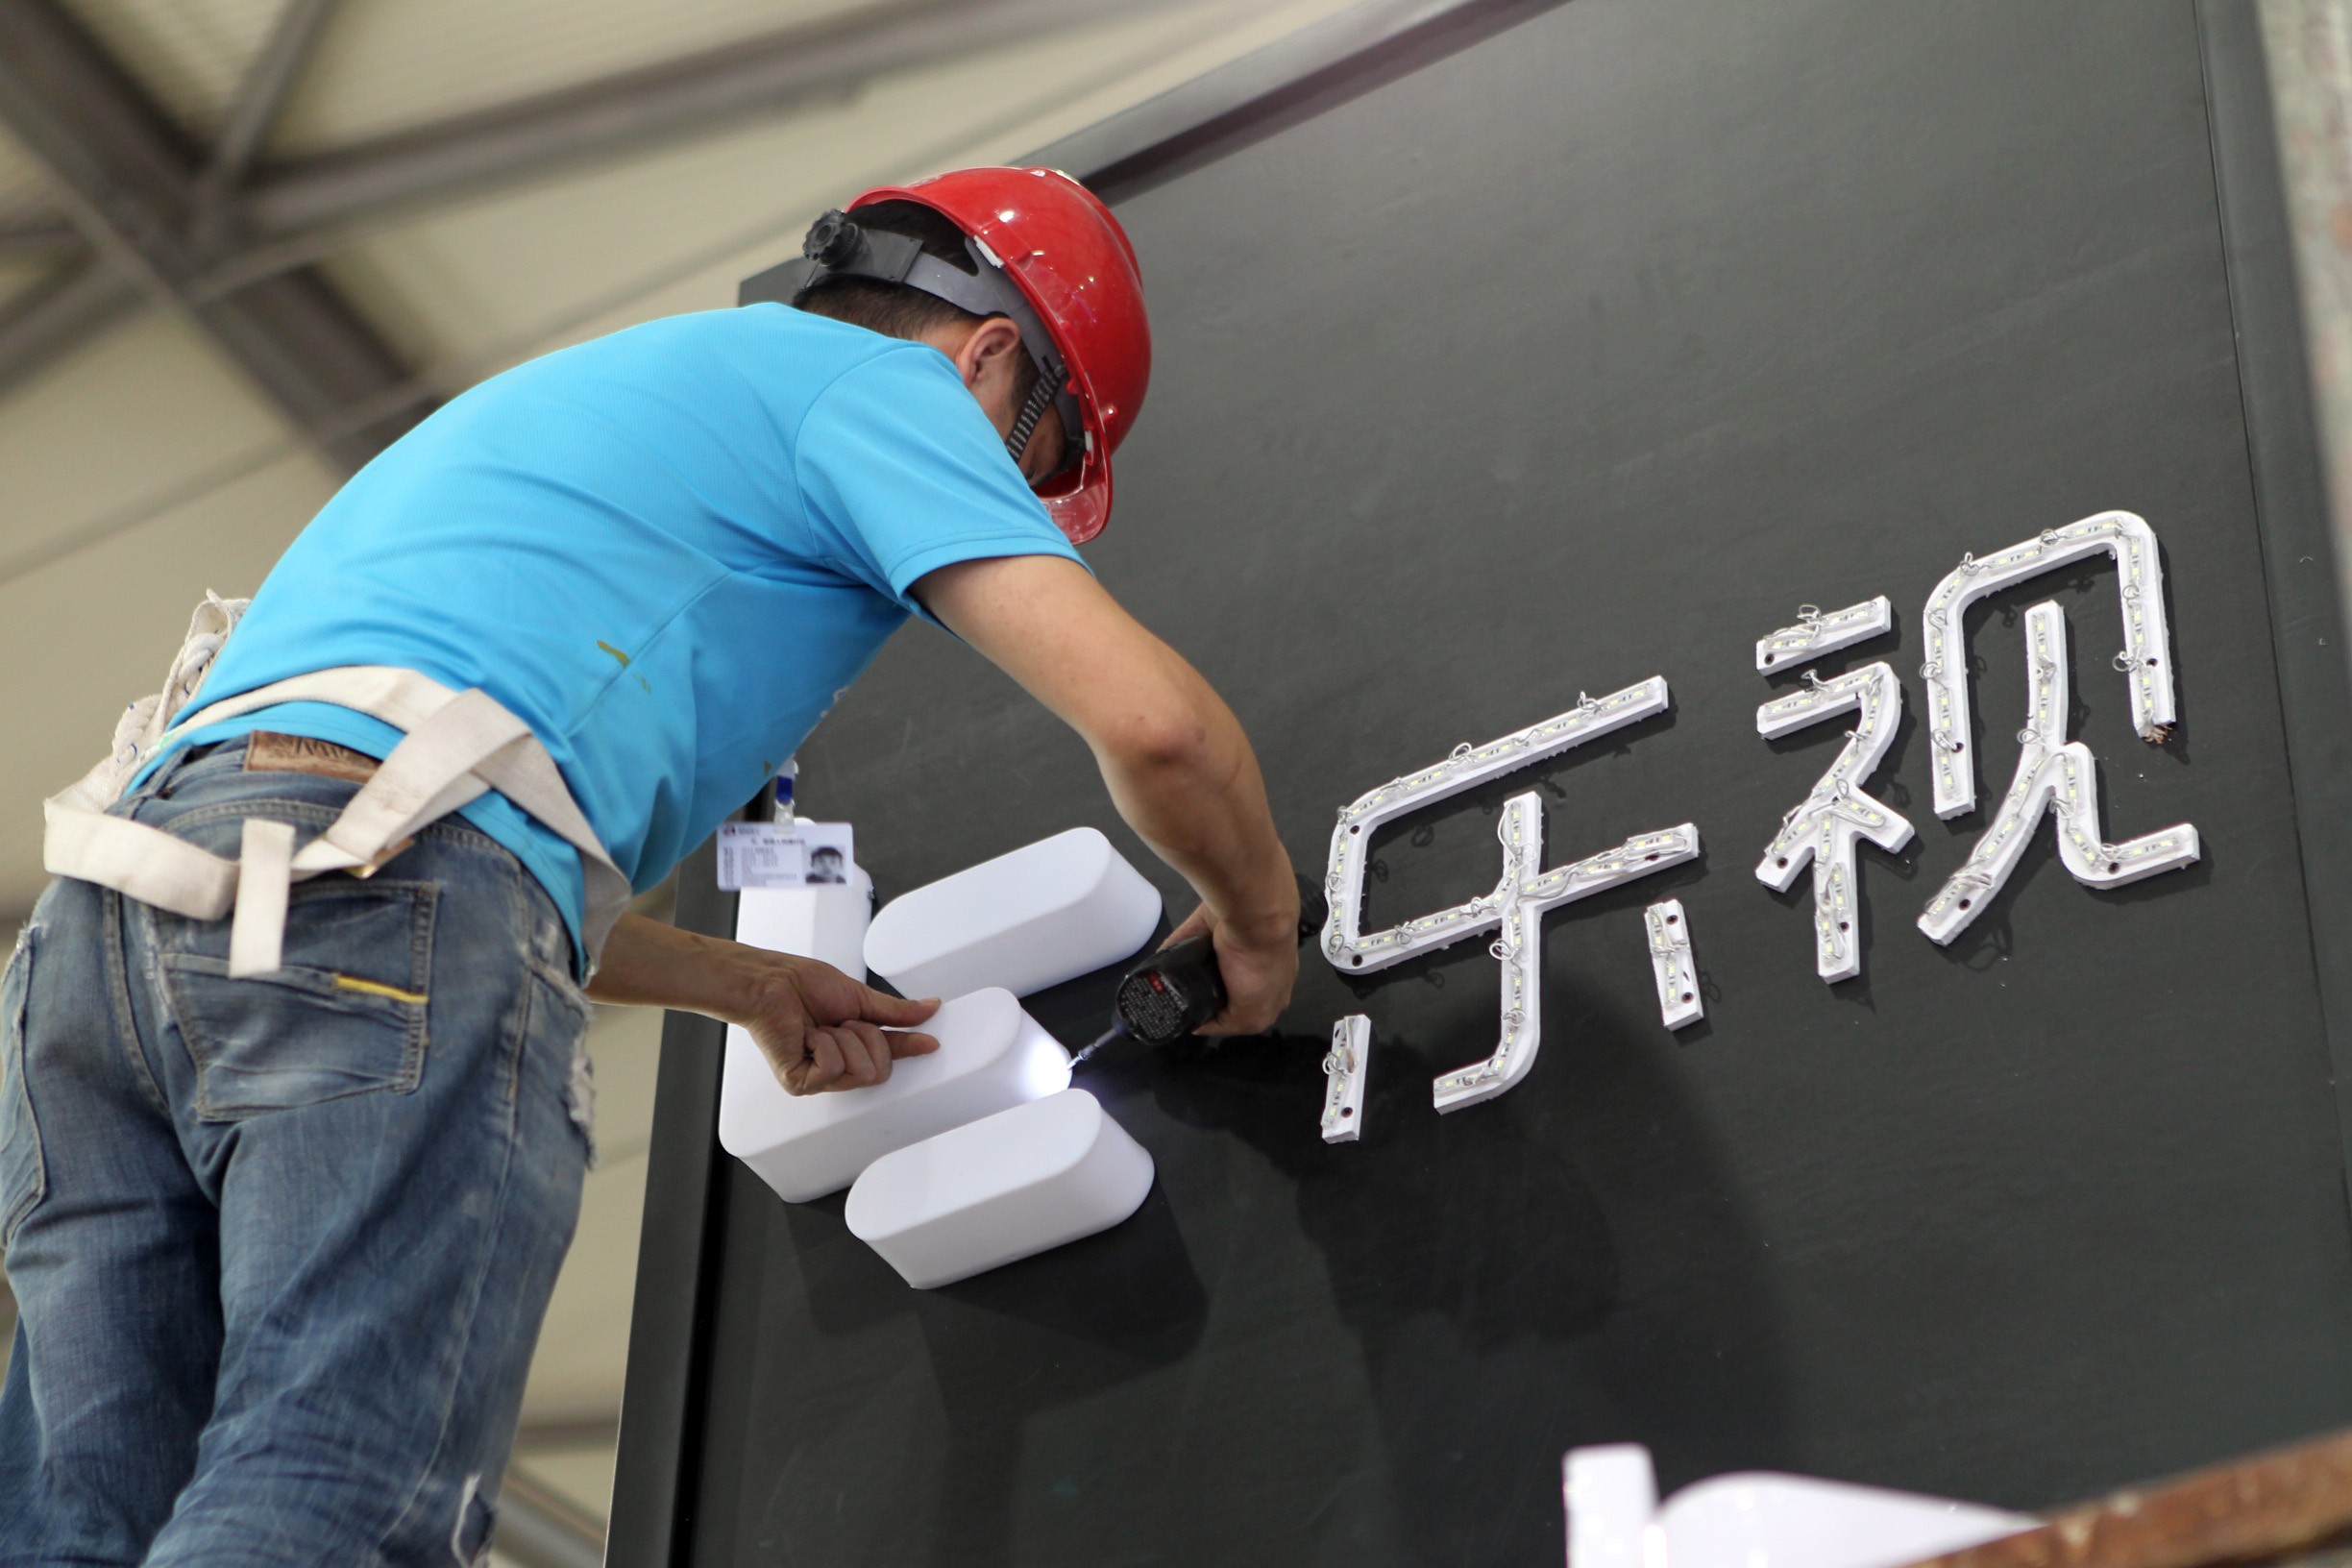 A worker installs the logo of LeEco, formerly known as Leshi or LeTV, in preparation for the 2016 International Consumer Electronics Show Asia. Photo: Imaginechina